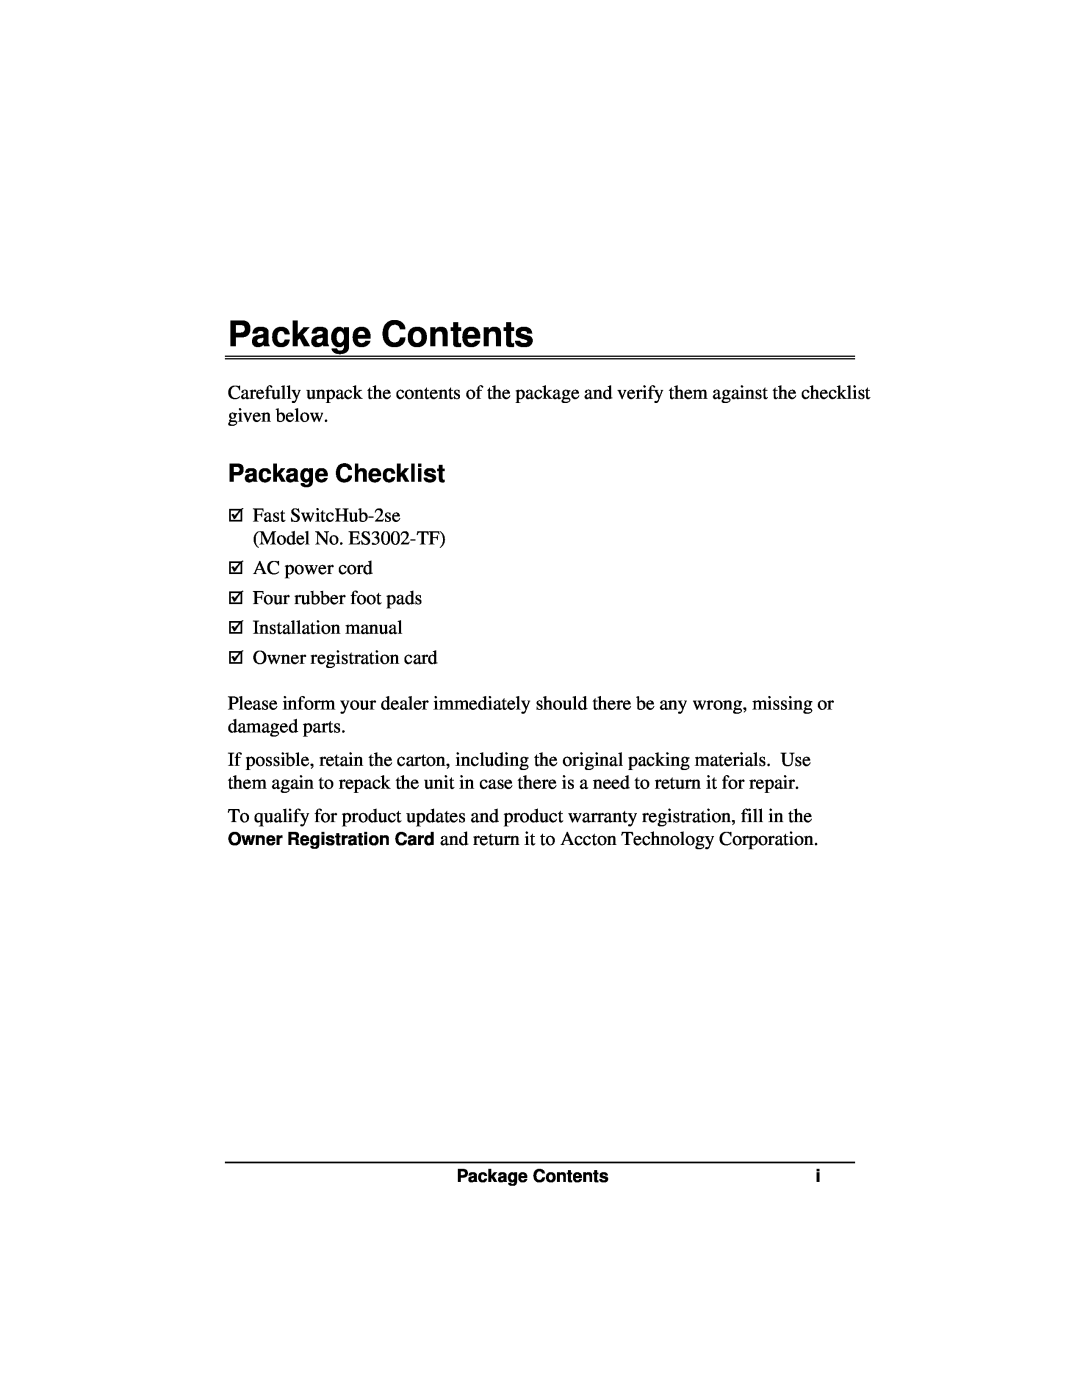 Accton Technology ES3002-TF manual Package Contents, Package Checklist 